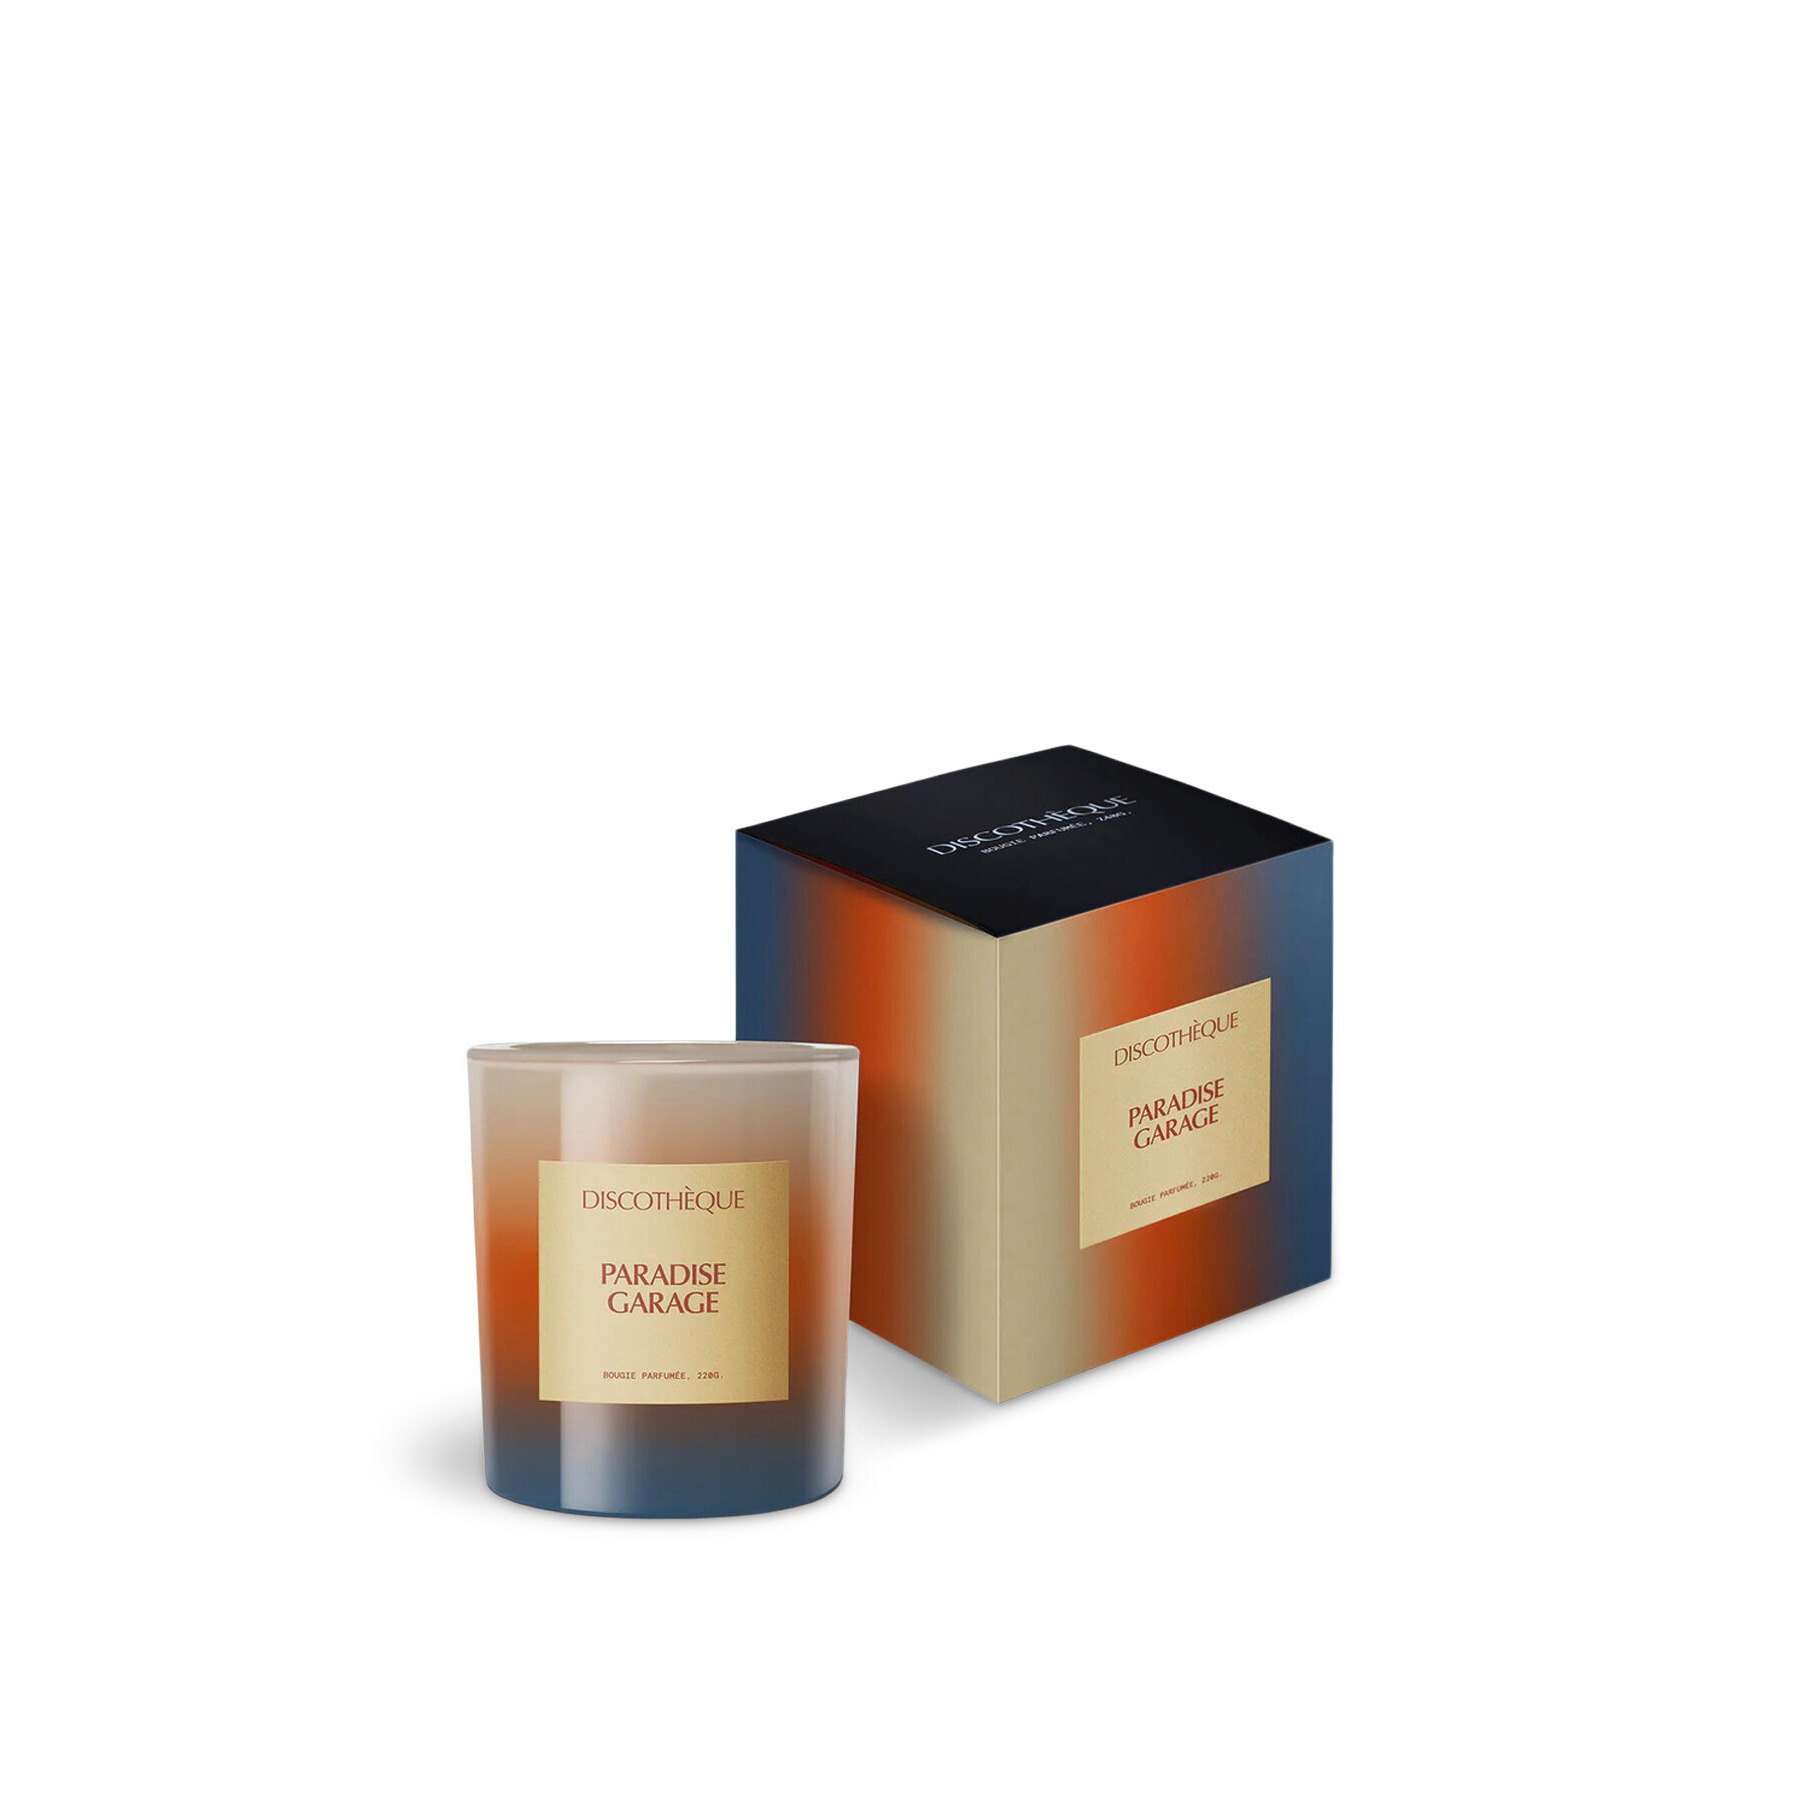 Discotheque Paradise Garage 220g Candle - image 1